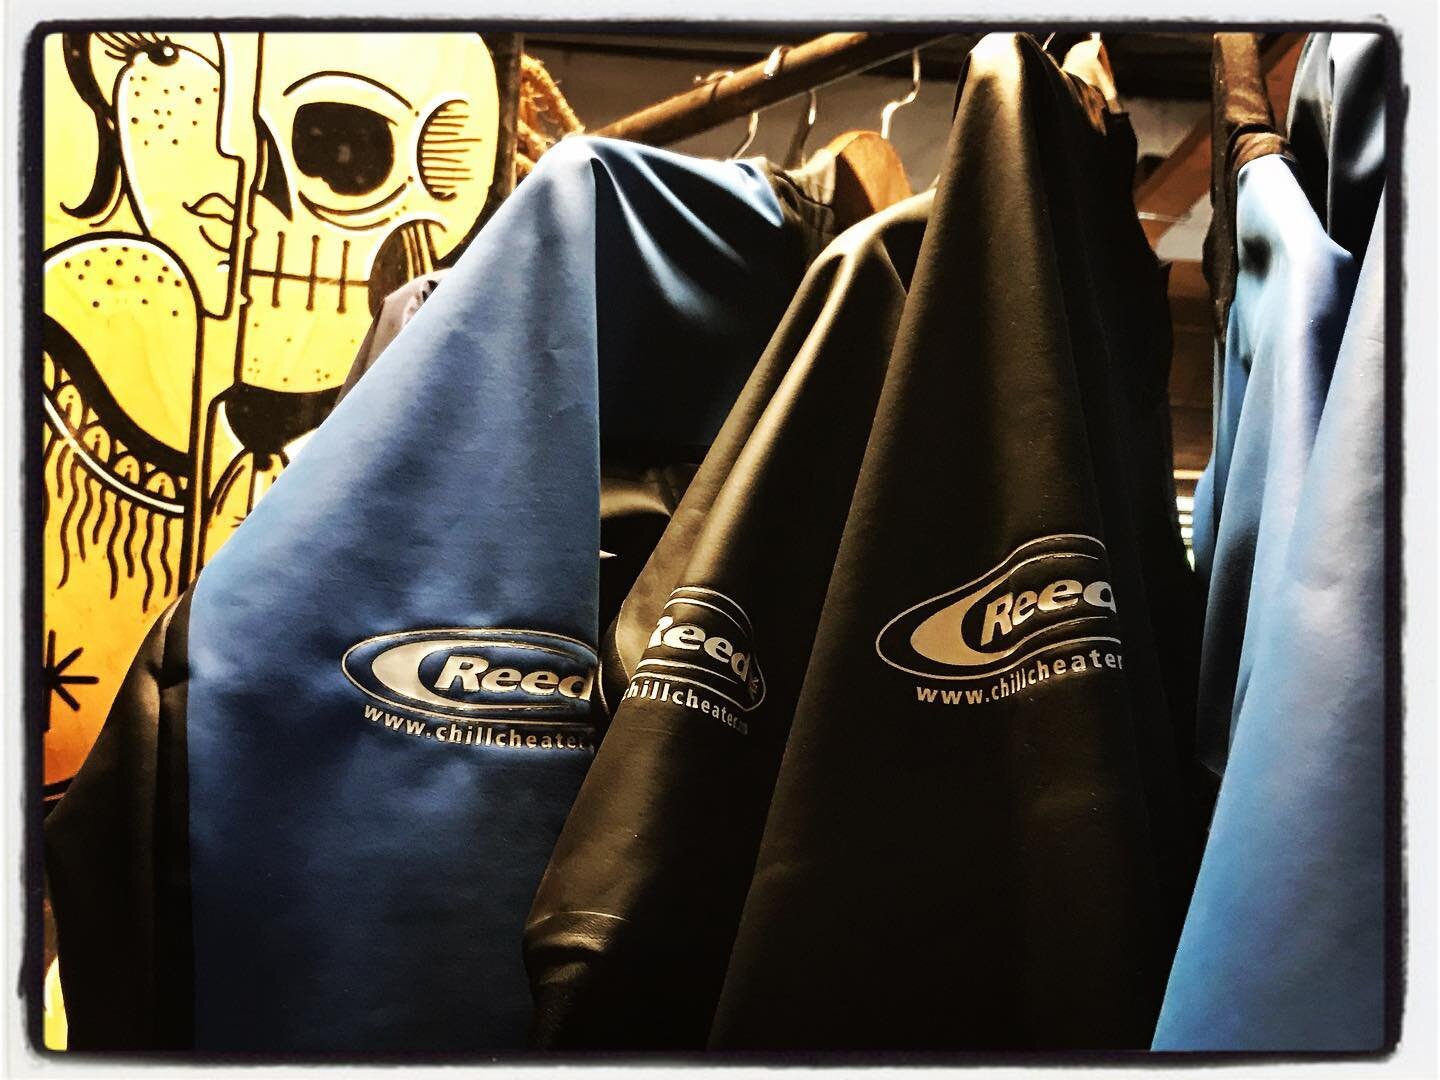 October ! Yay!.
Fall paddle clothing is here. Wether for SUP, Canoe or Kayak, in neoprene, goretex and aquatherm. Plenty of NRS Boundary Boots in stock., but last of the Reed clobber, including oh so yummy, Chillcheater fleece and Competition Top Dec